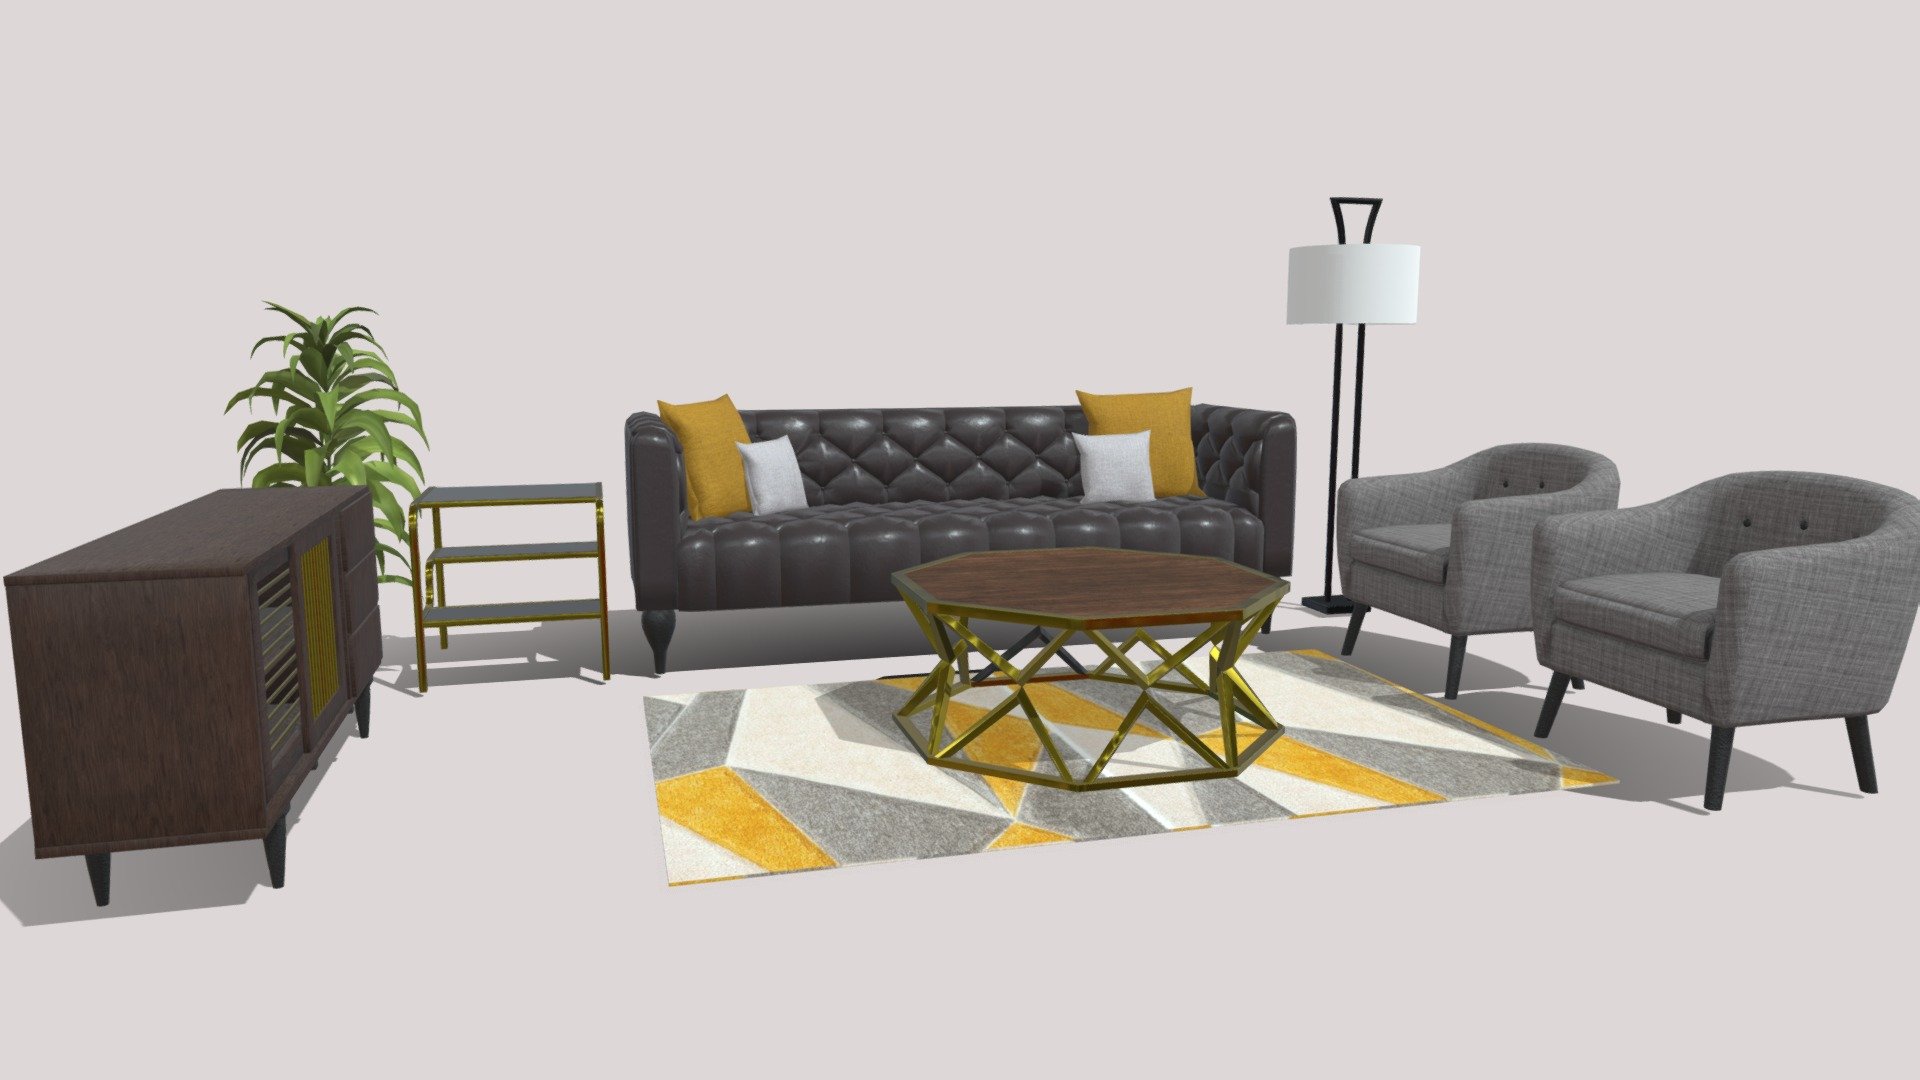 Low poly living room props with single texture maps. Can be used for various platforms. The props are seperated at object level so can be moved individually 3d model